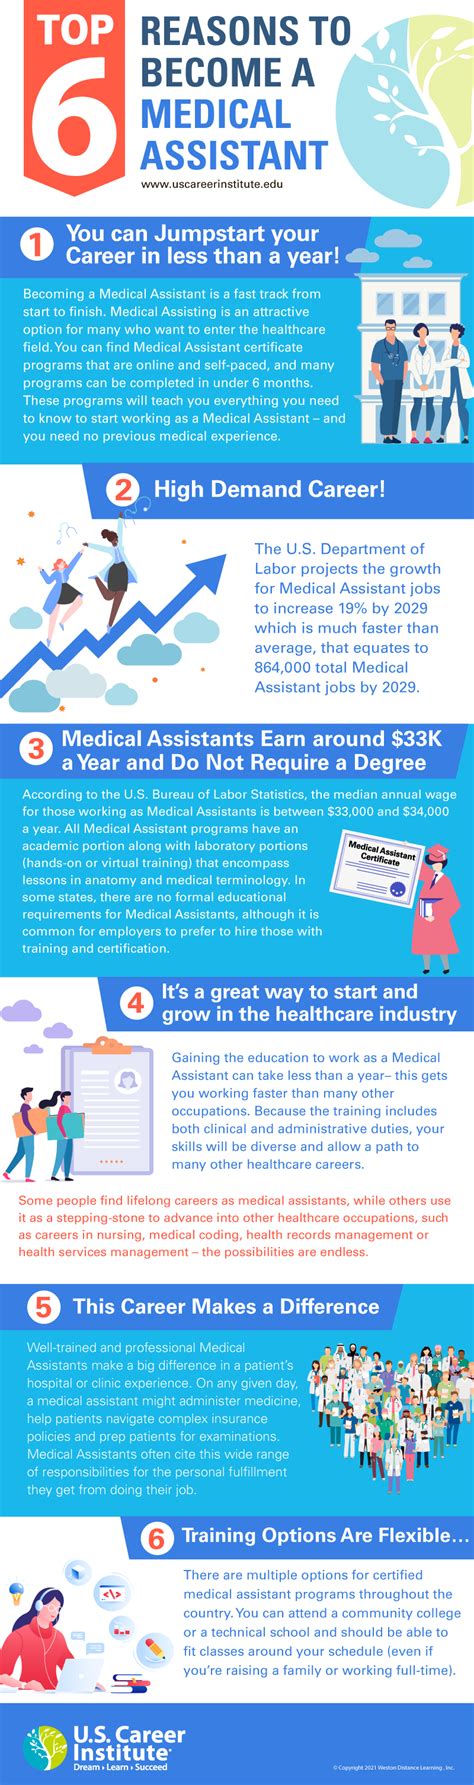 6 Reasons To Become A Medical Assistant U S Career Institute